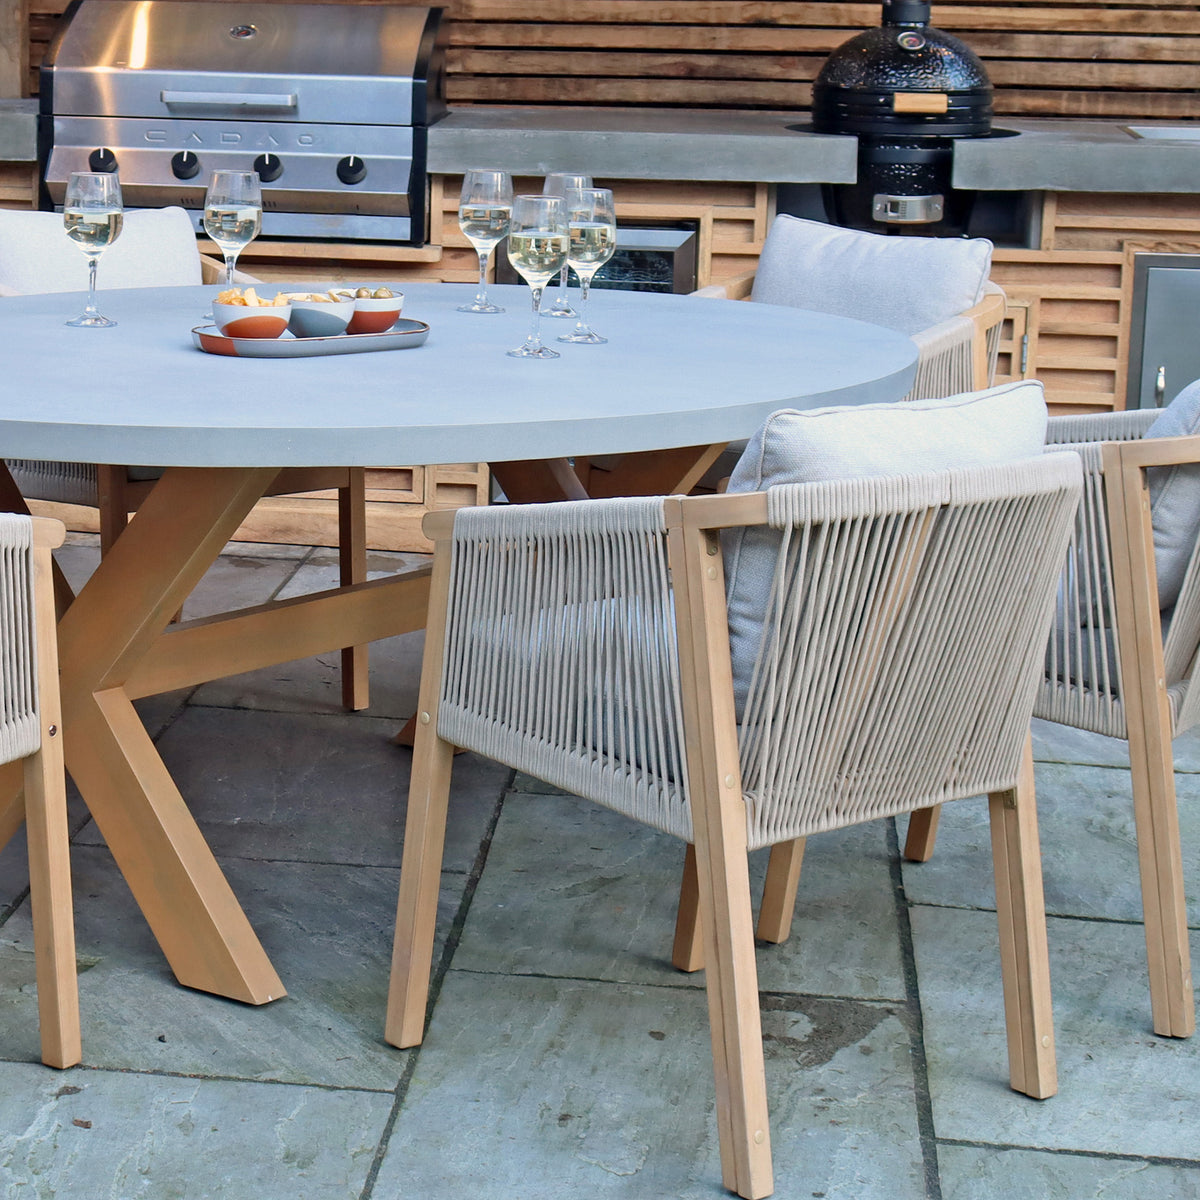 Luna Ellipse Concrete Set with 6 Chairs from Roseland Furniture